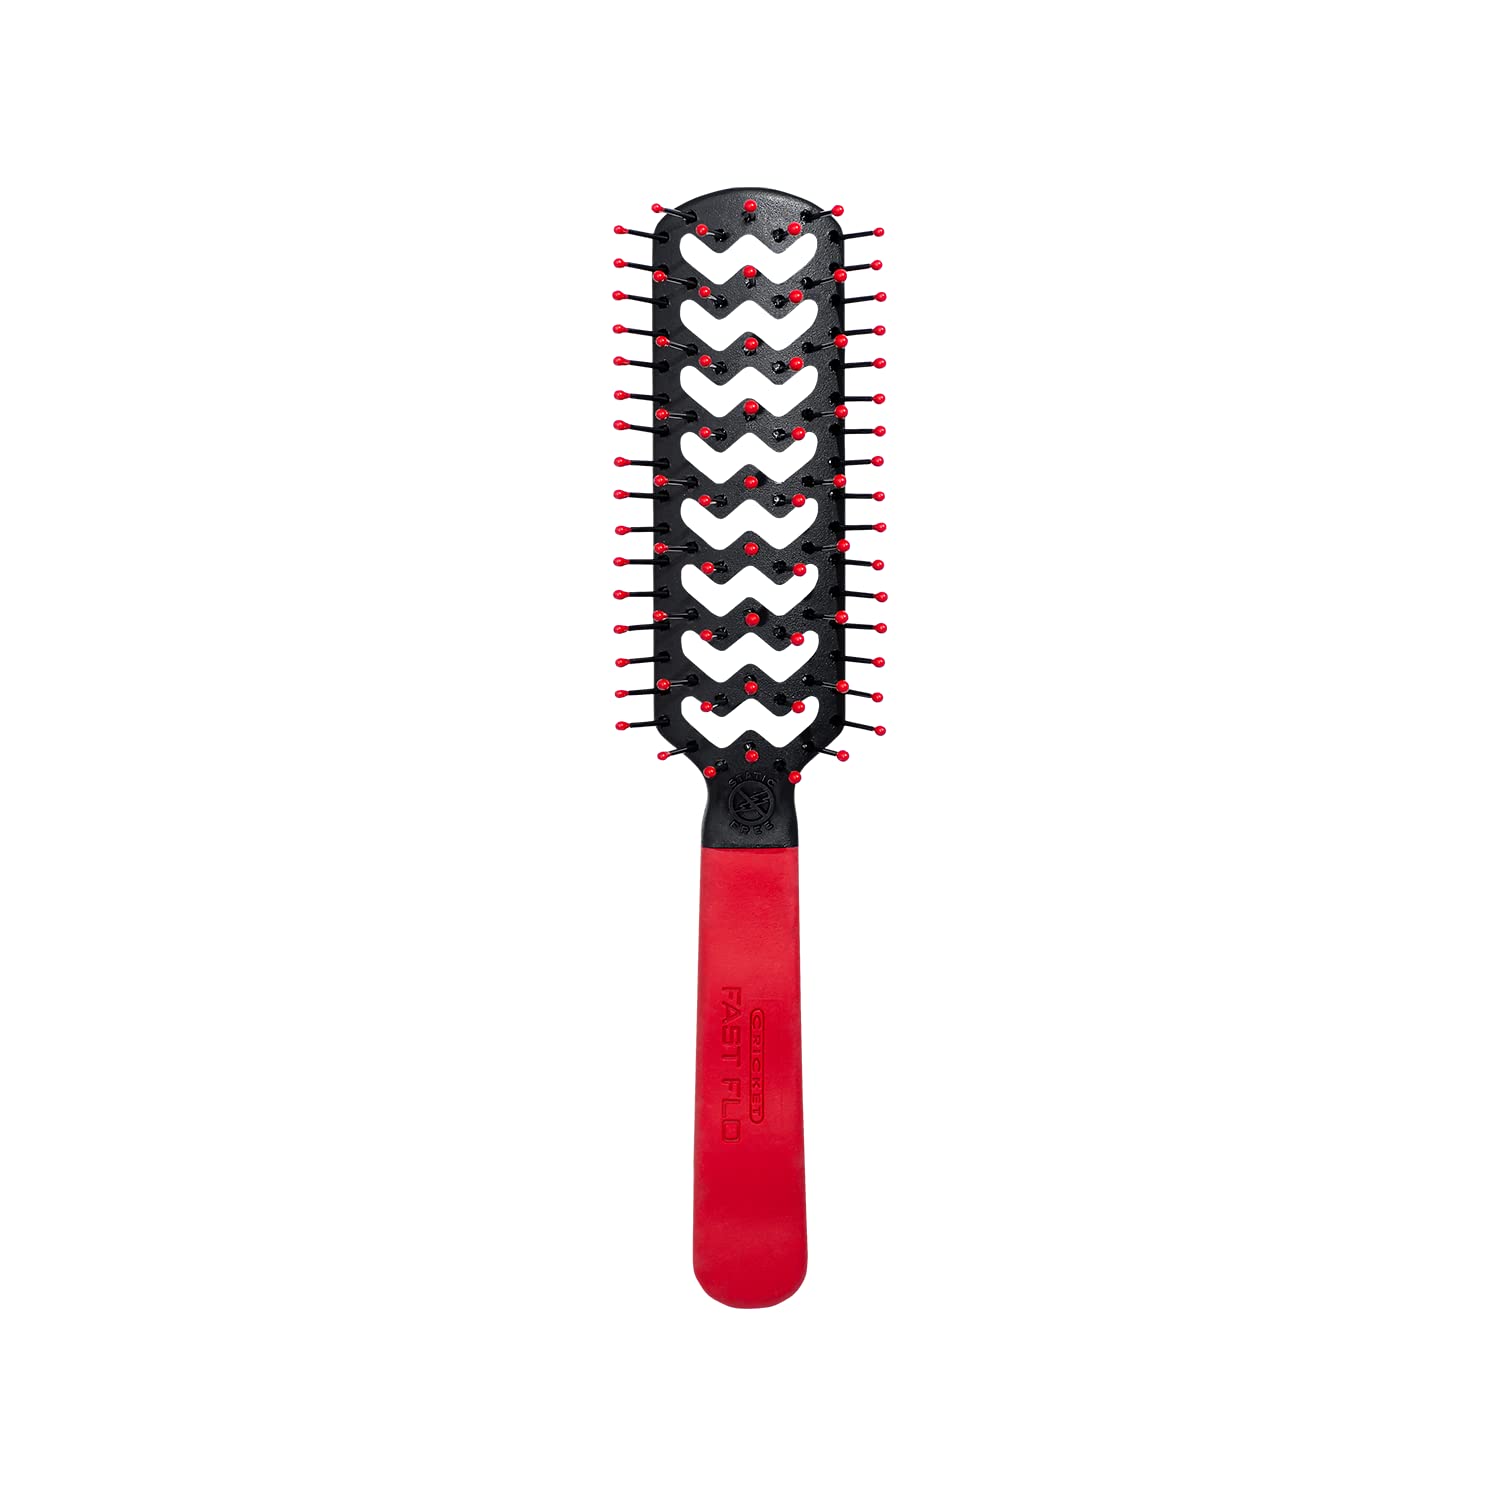 Cricket Static Free Fast Flo Color Vent Hair Brush for Blow Drying, Styling and Detangling for Long Short Thick Thin Curly Straight Wavy All Hair Types, So Rad (Red)